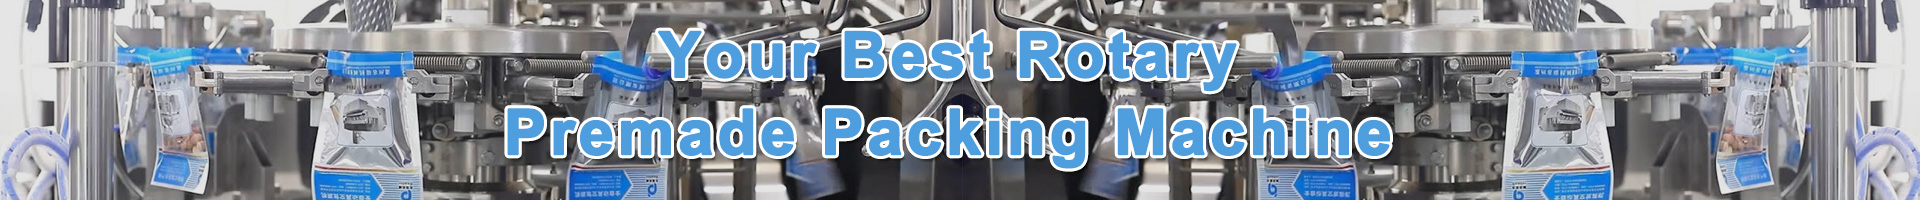 Your-Best-Rotary-Premade-Packing-Machine